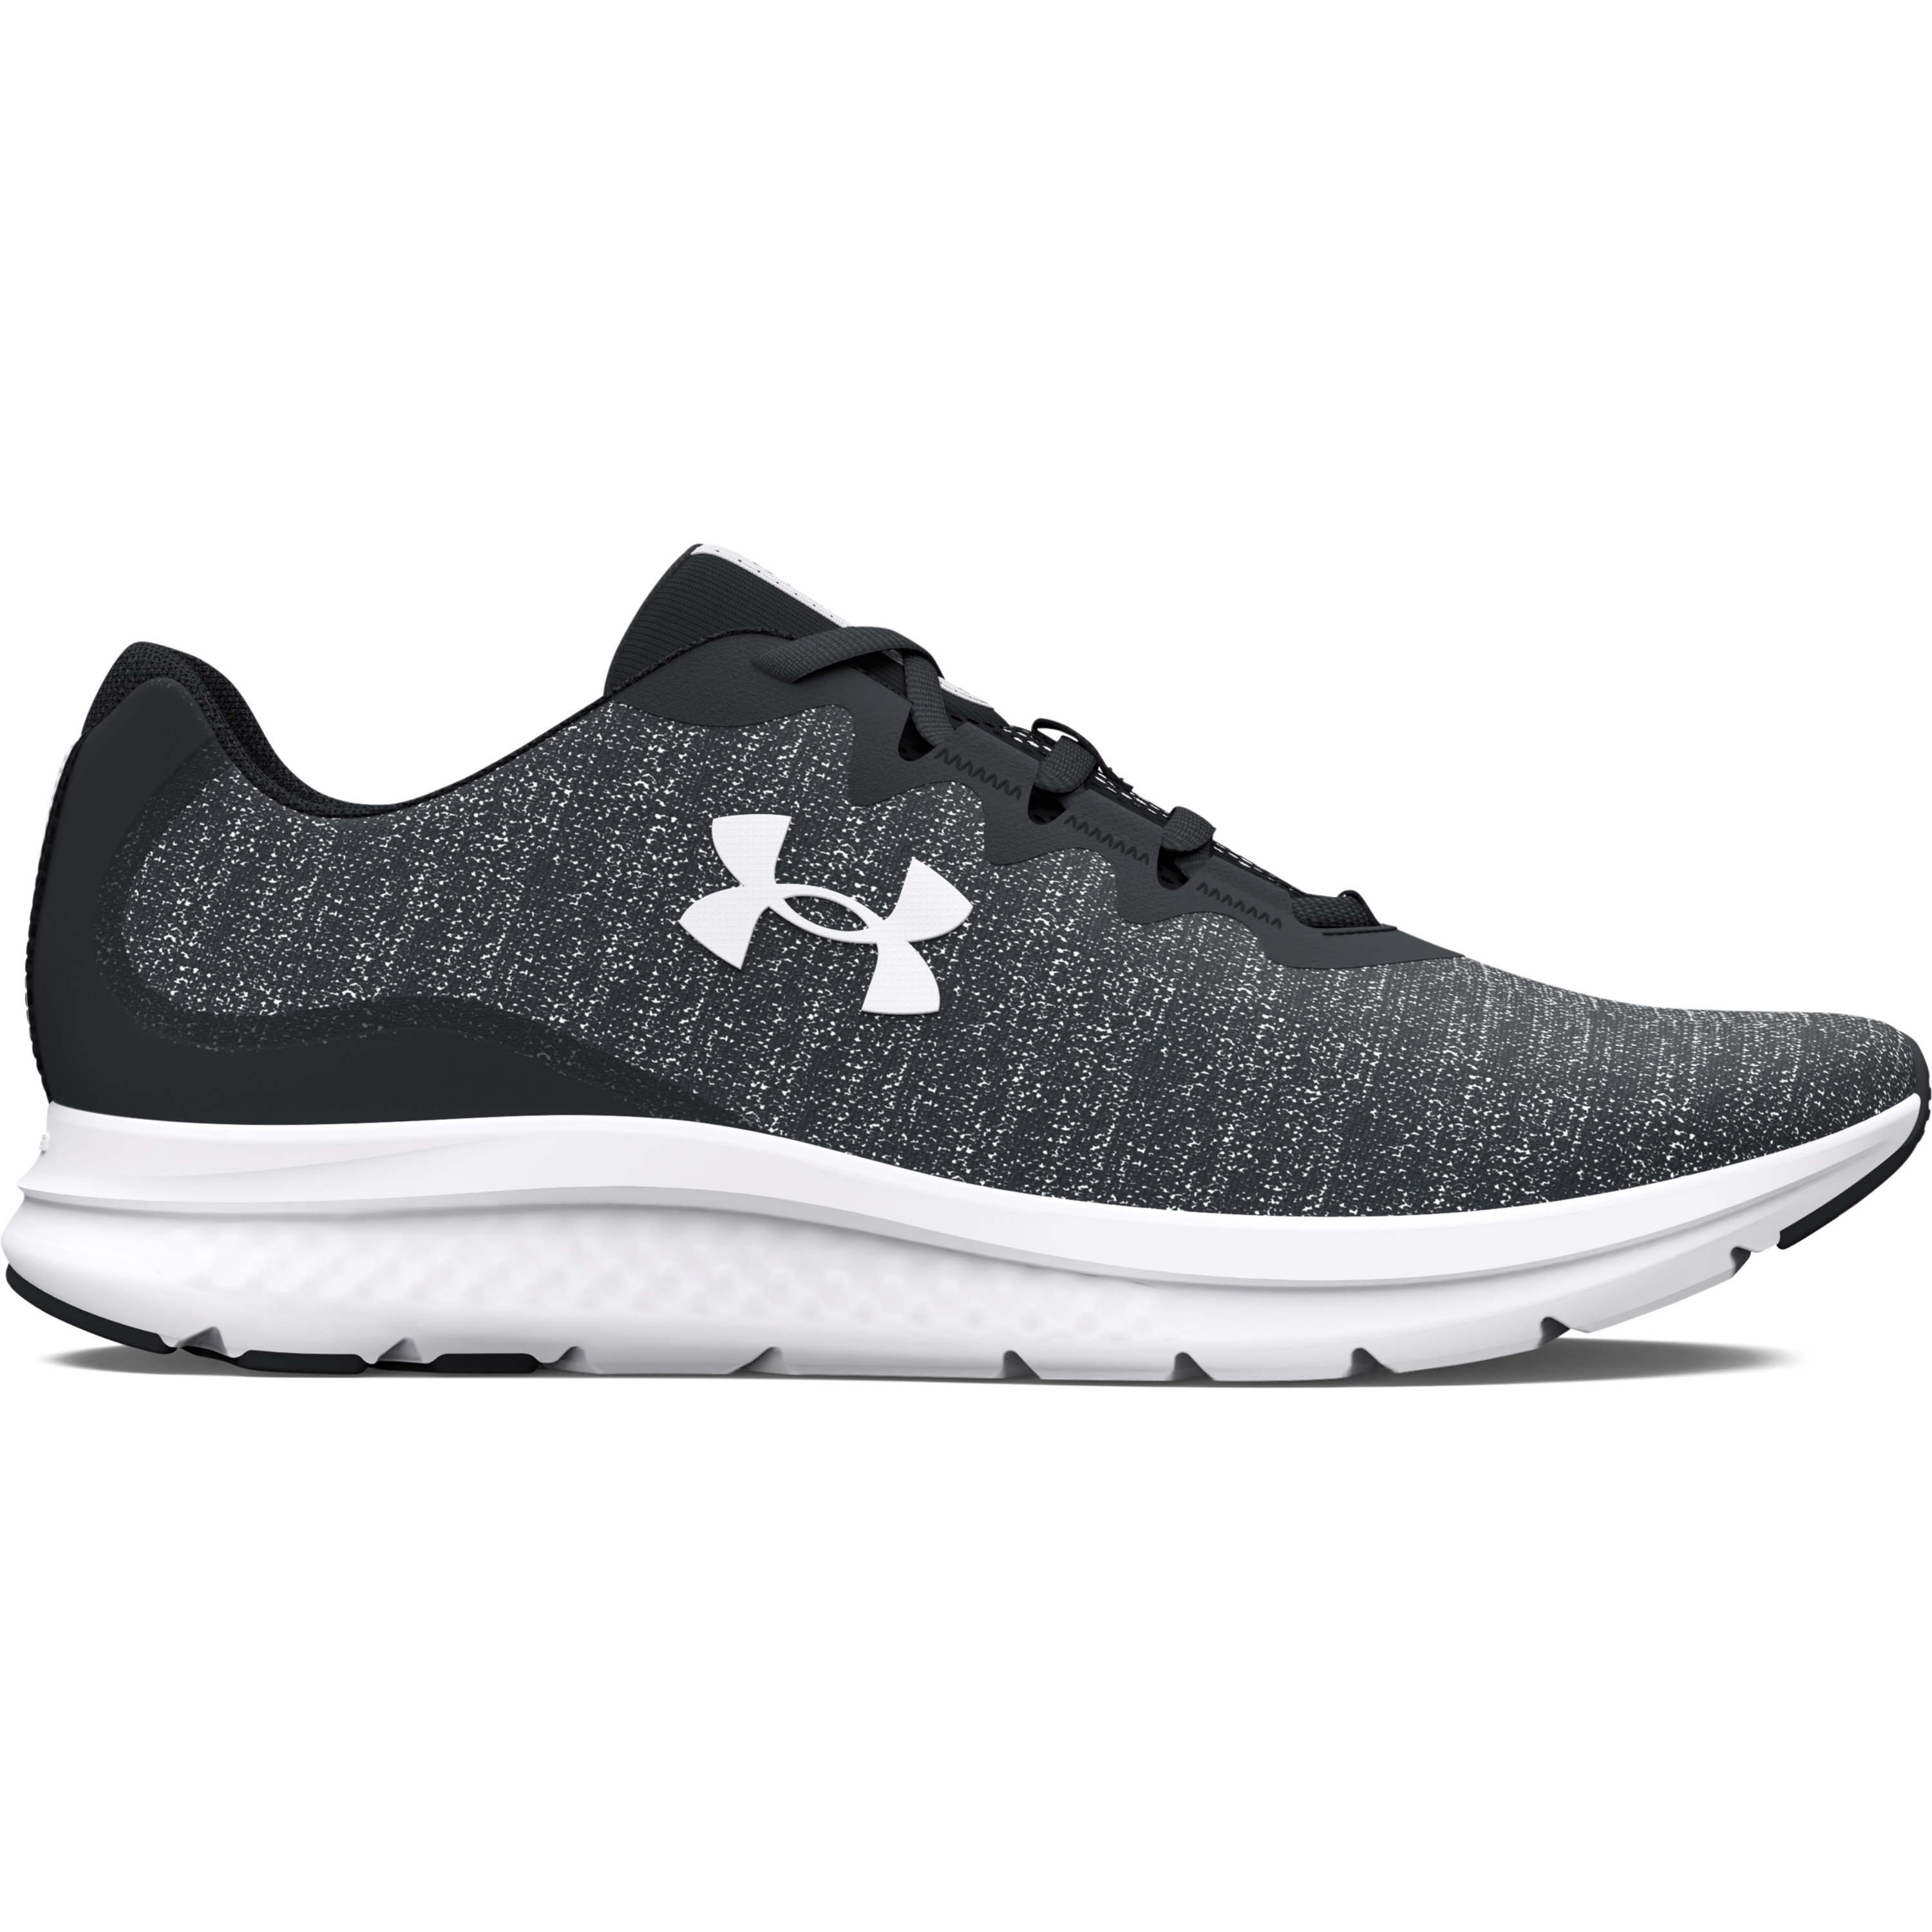 Chaussures de running femme Under Armour Charged Impulse 3 Knit